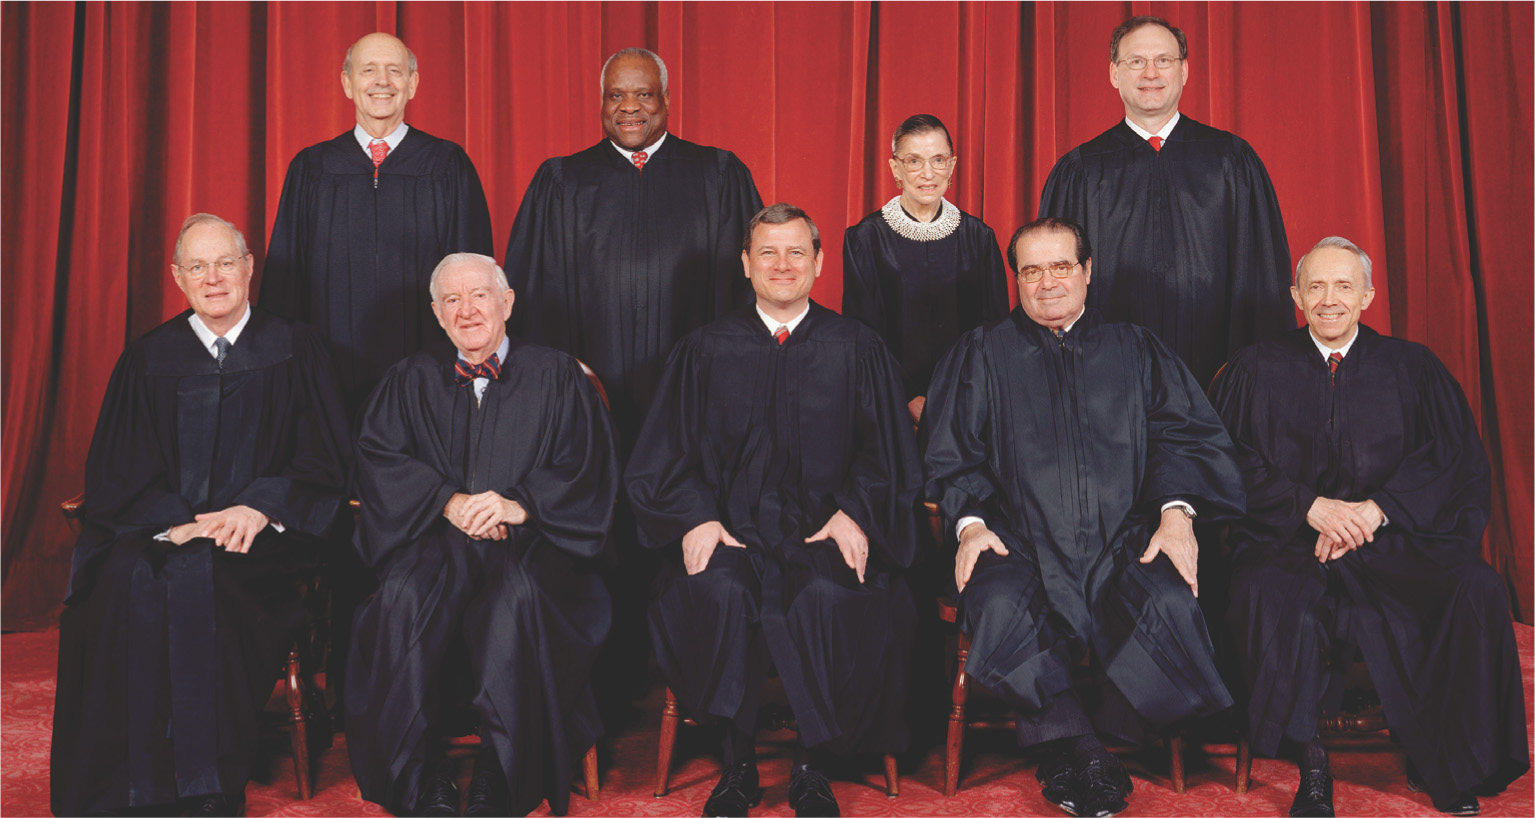 A photo shows
the nine judges of the Supreme Court.